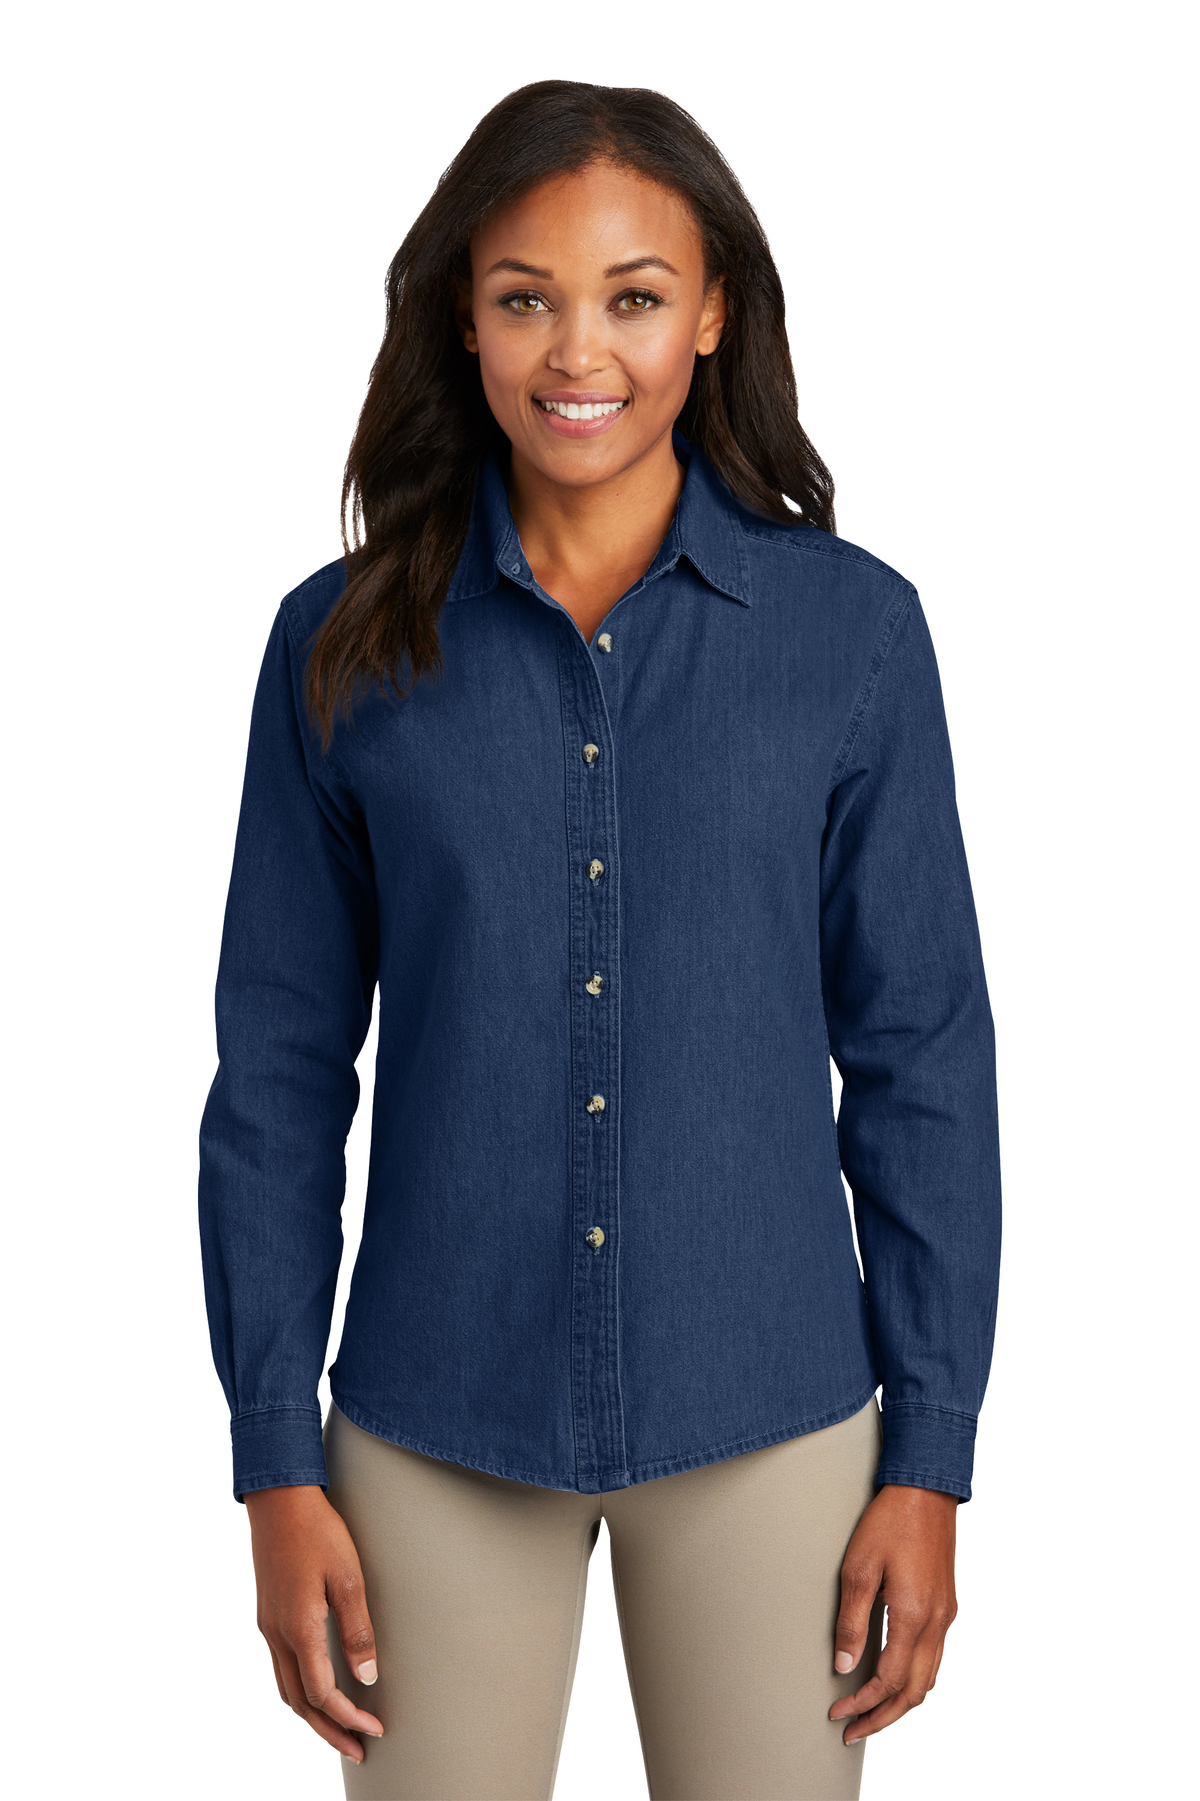 Women Cotton Jeans Shirts - Buy Women Cotton Jeans Shirts online in India